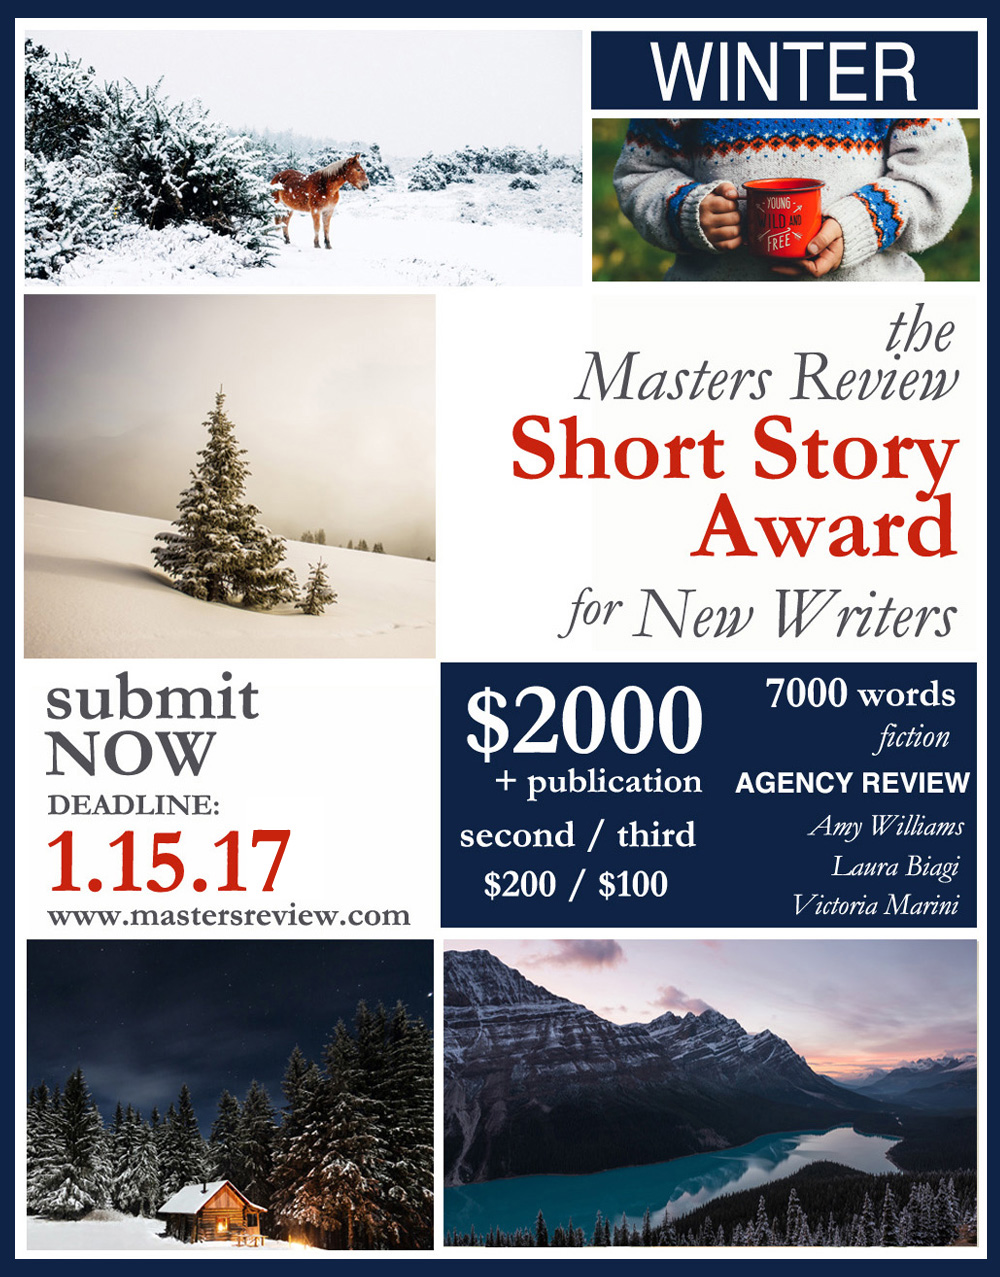 What are some popular magazines that accept submissions of short stories?